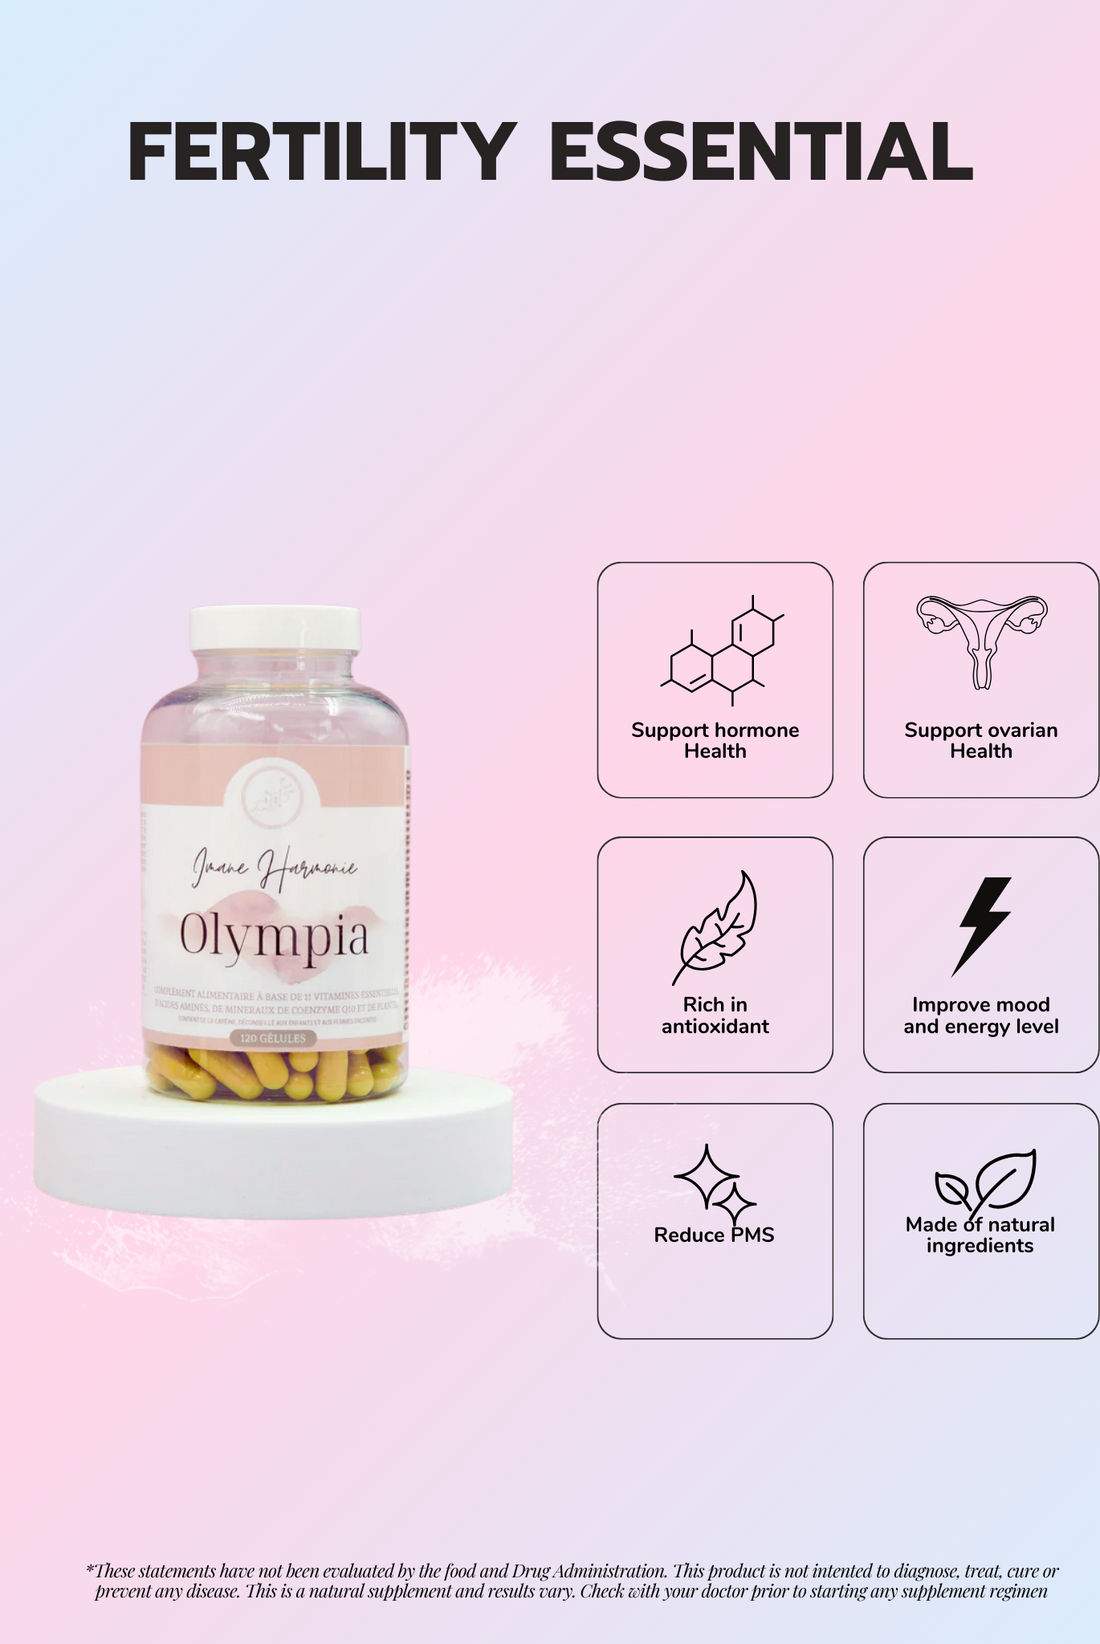 Features of Olympia supplement : Support hormone health, support ovarian health, rich in antioxidant, improve mood and energy level, reduce pms, made of natural ingredients